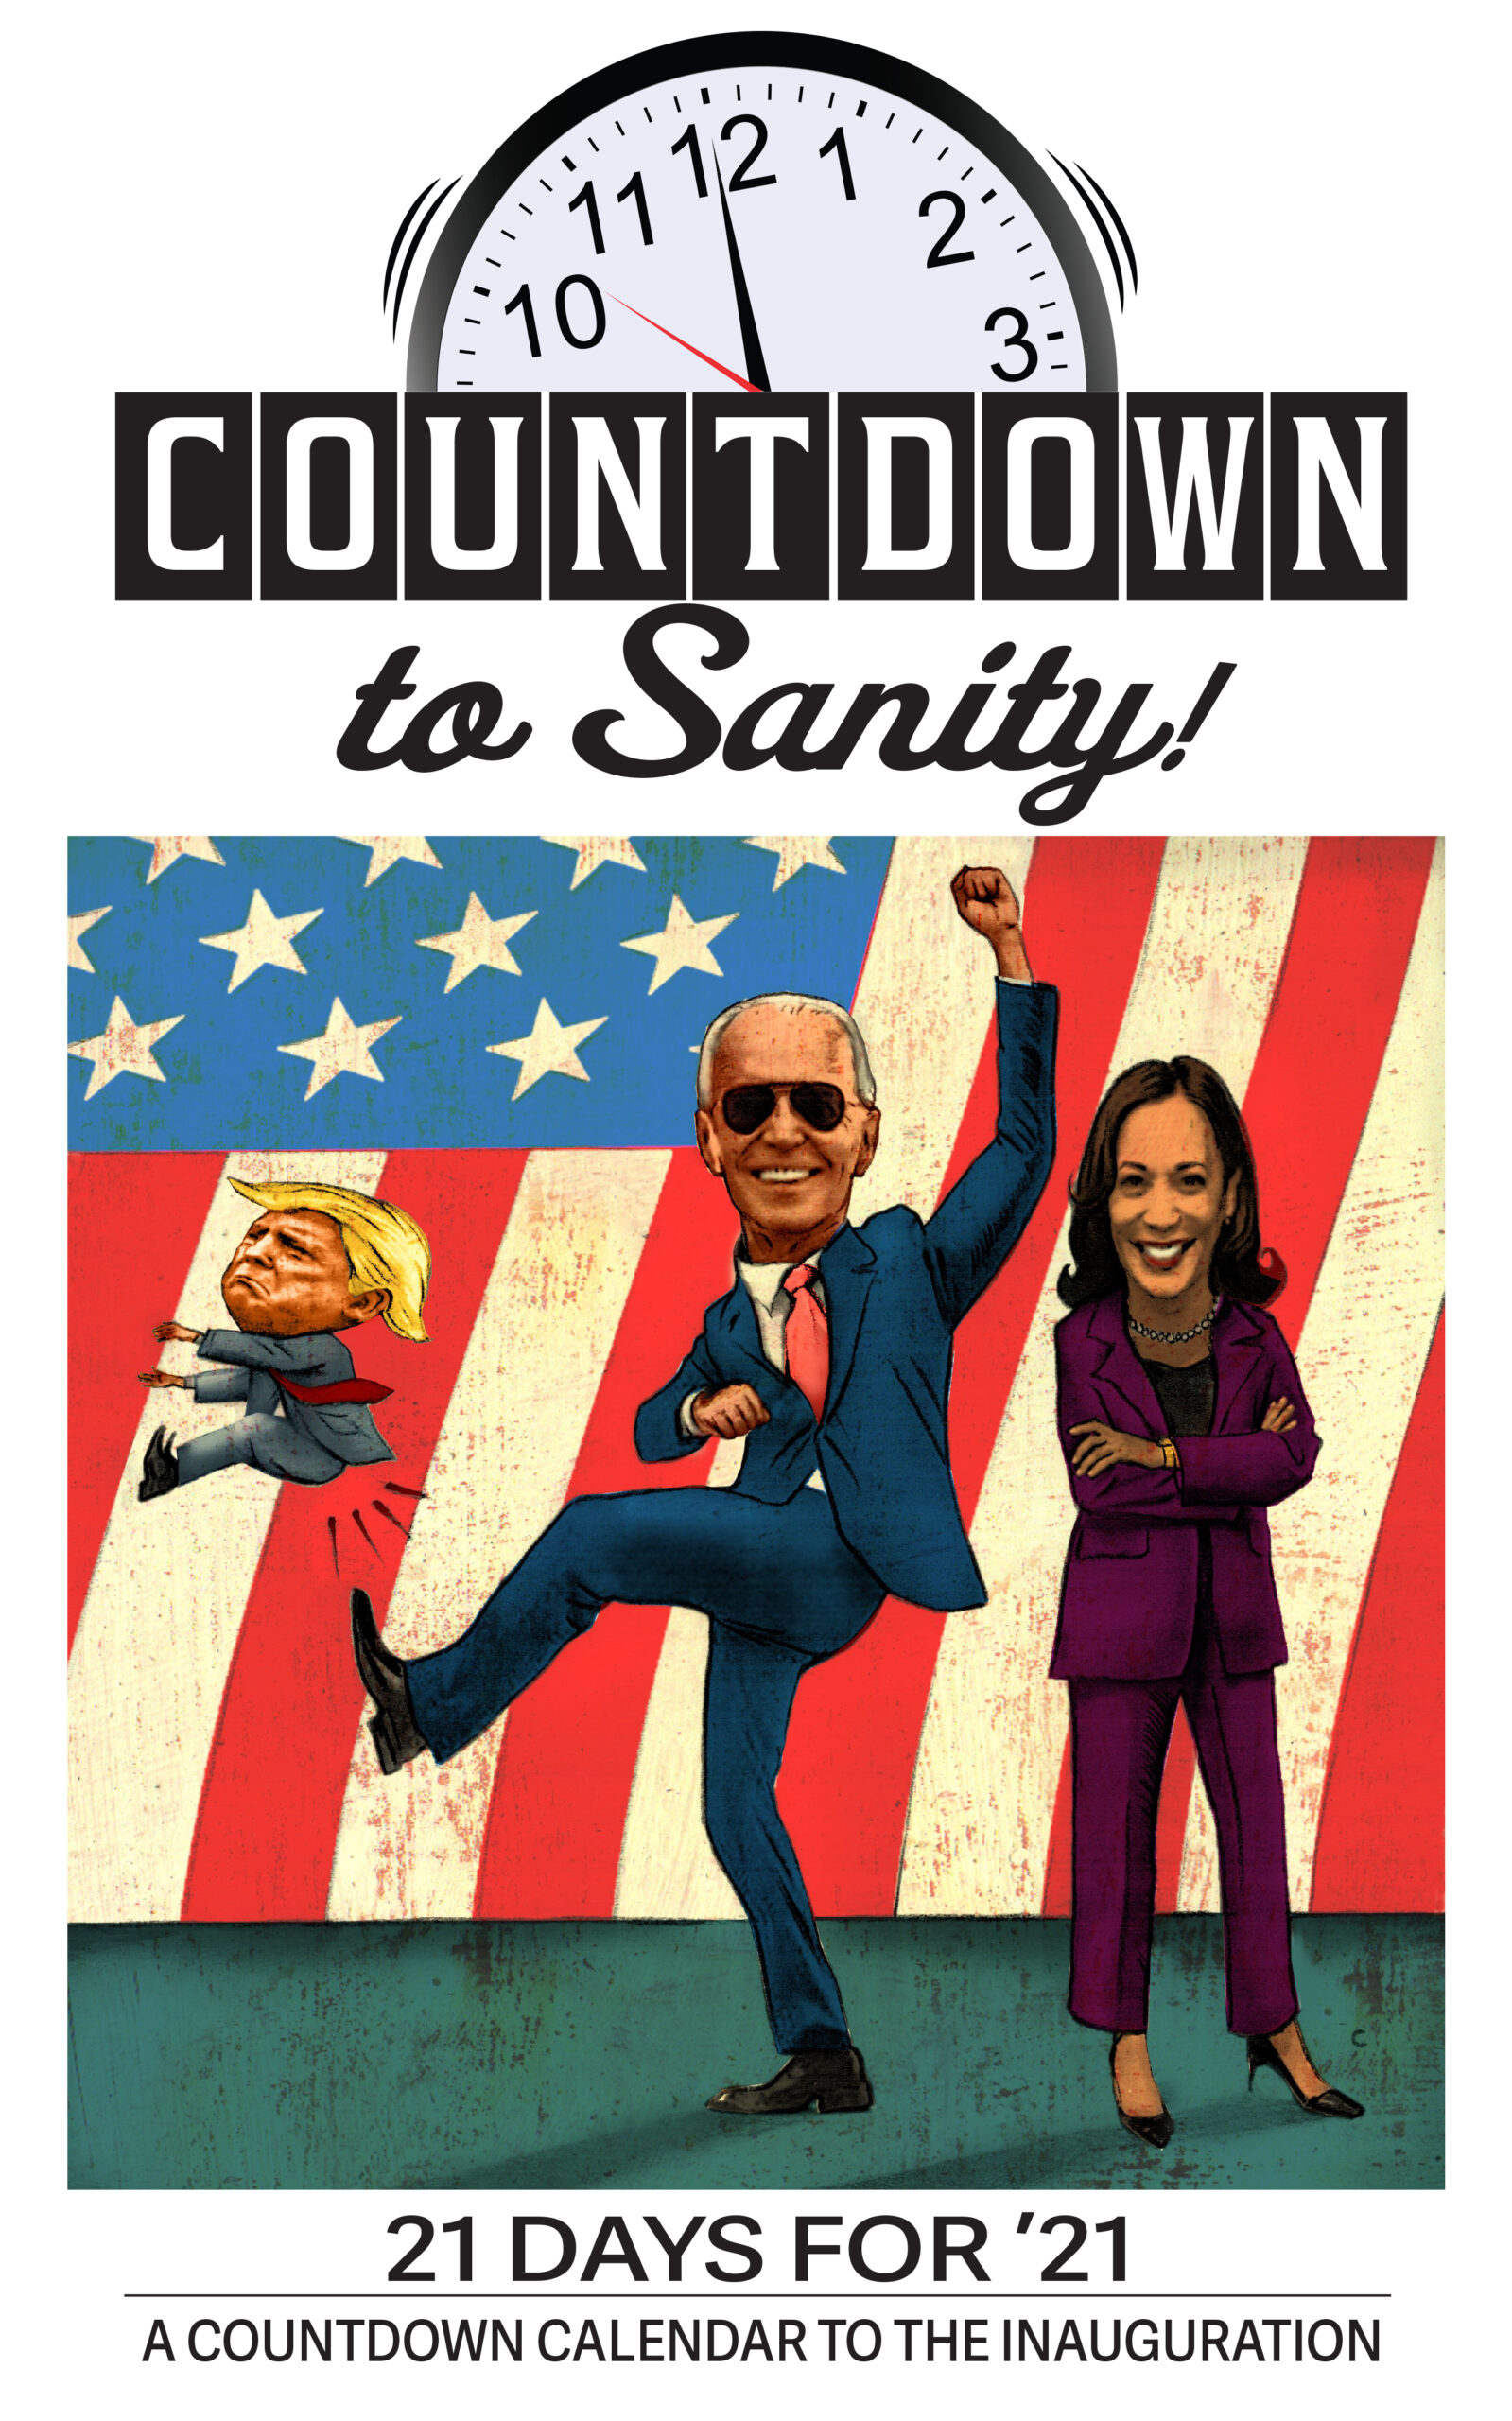 Countdown to Sanity!